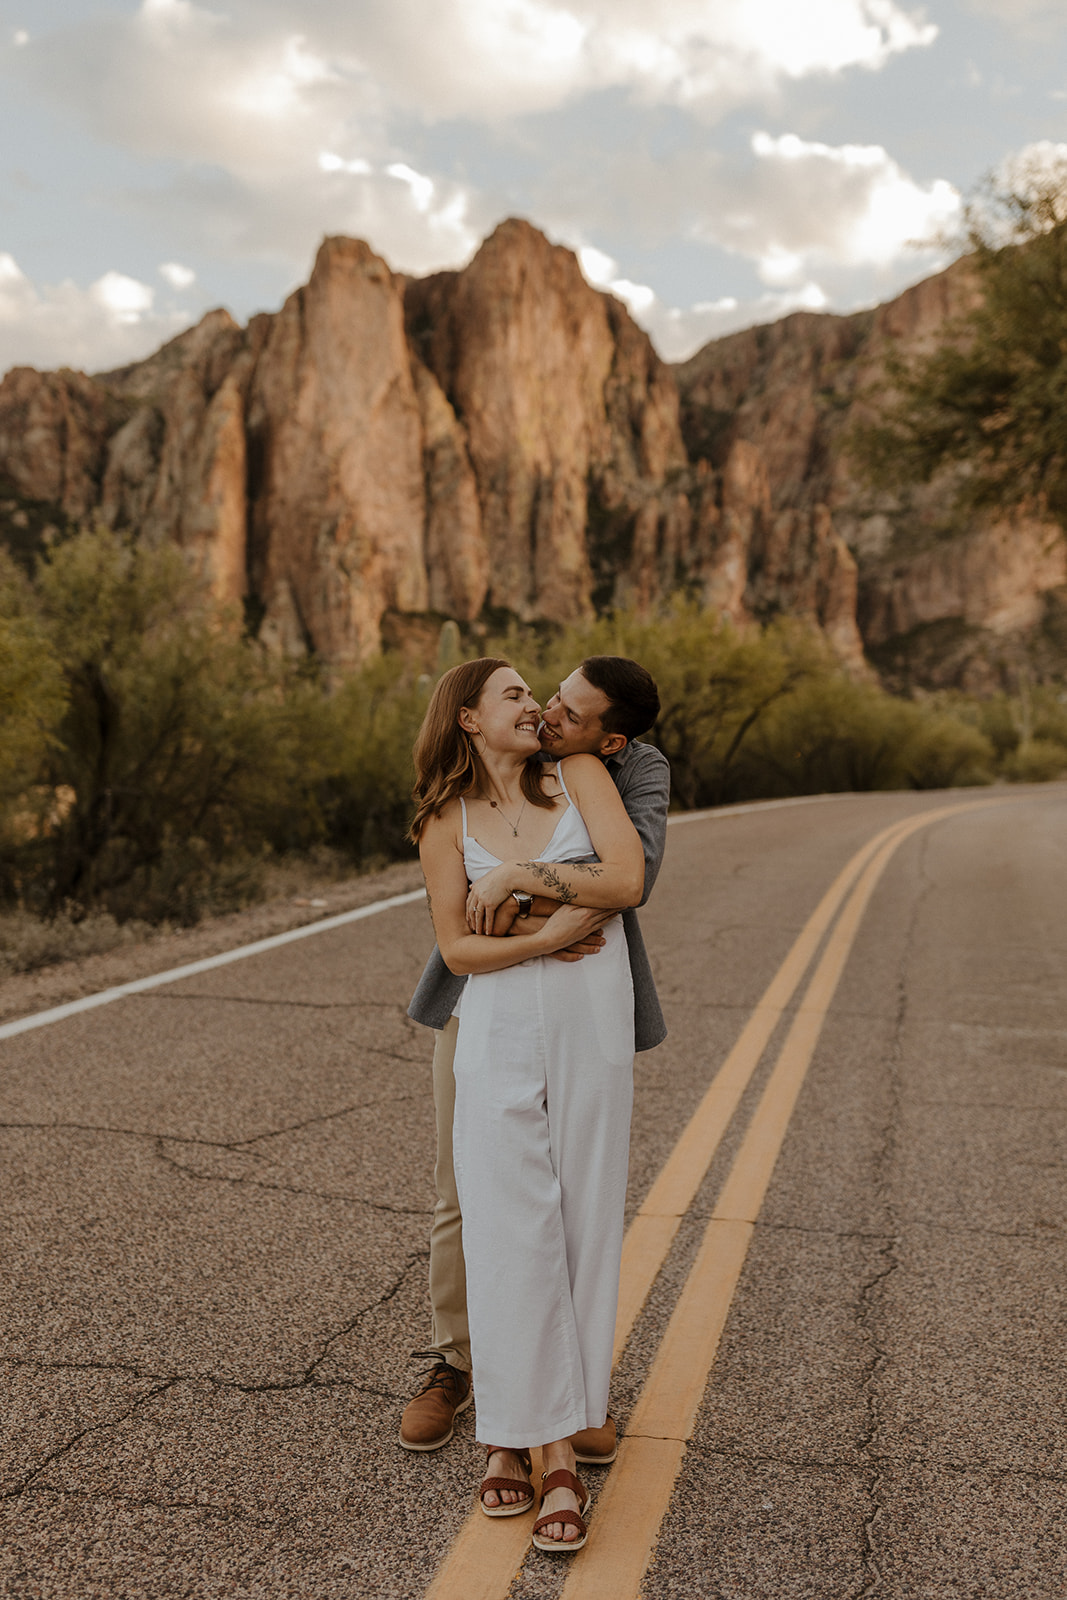 newly engaged couple holding each other on the road with mountain scenery in the background 